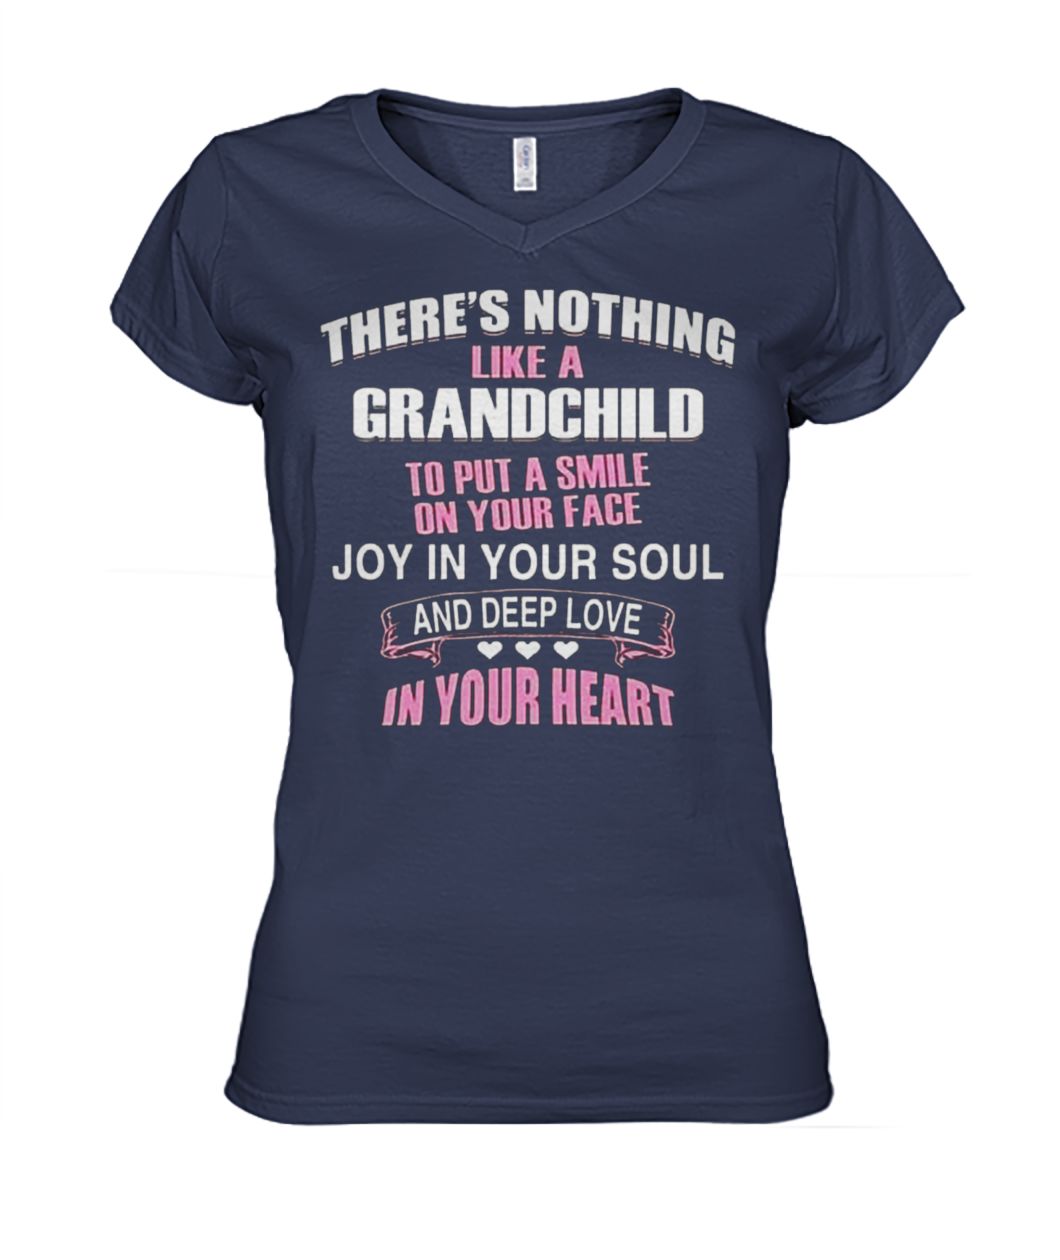 There's nothing like a grandchild to put a smile on your face women's v-neck